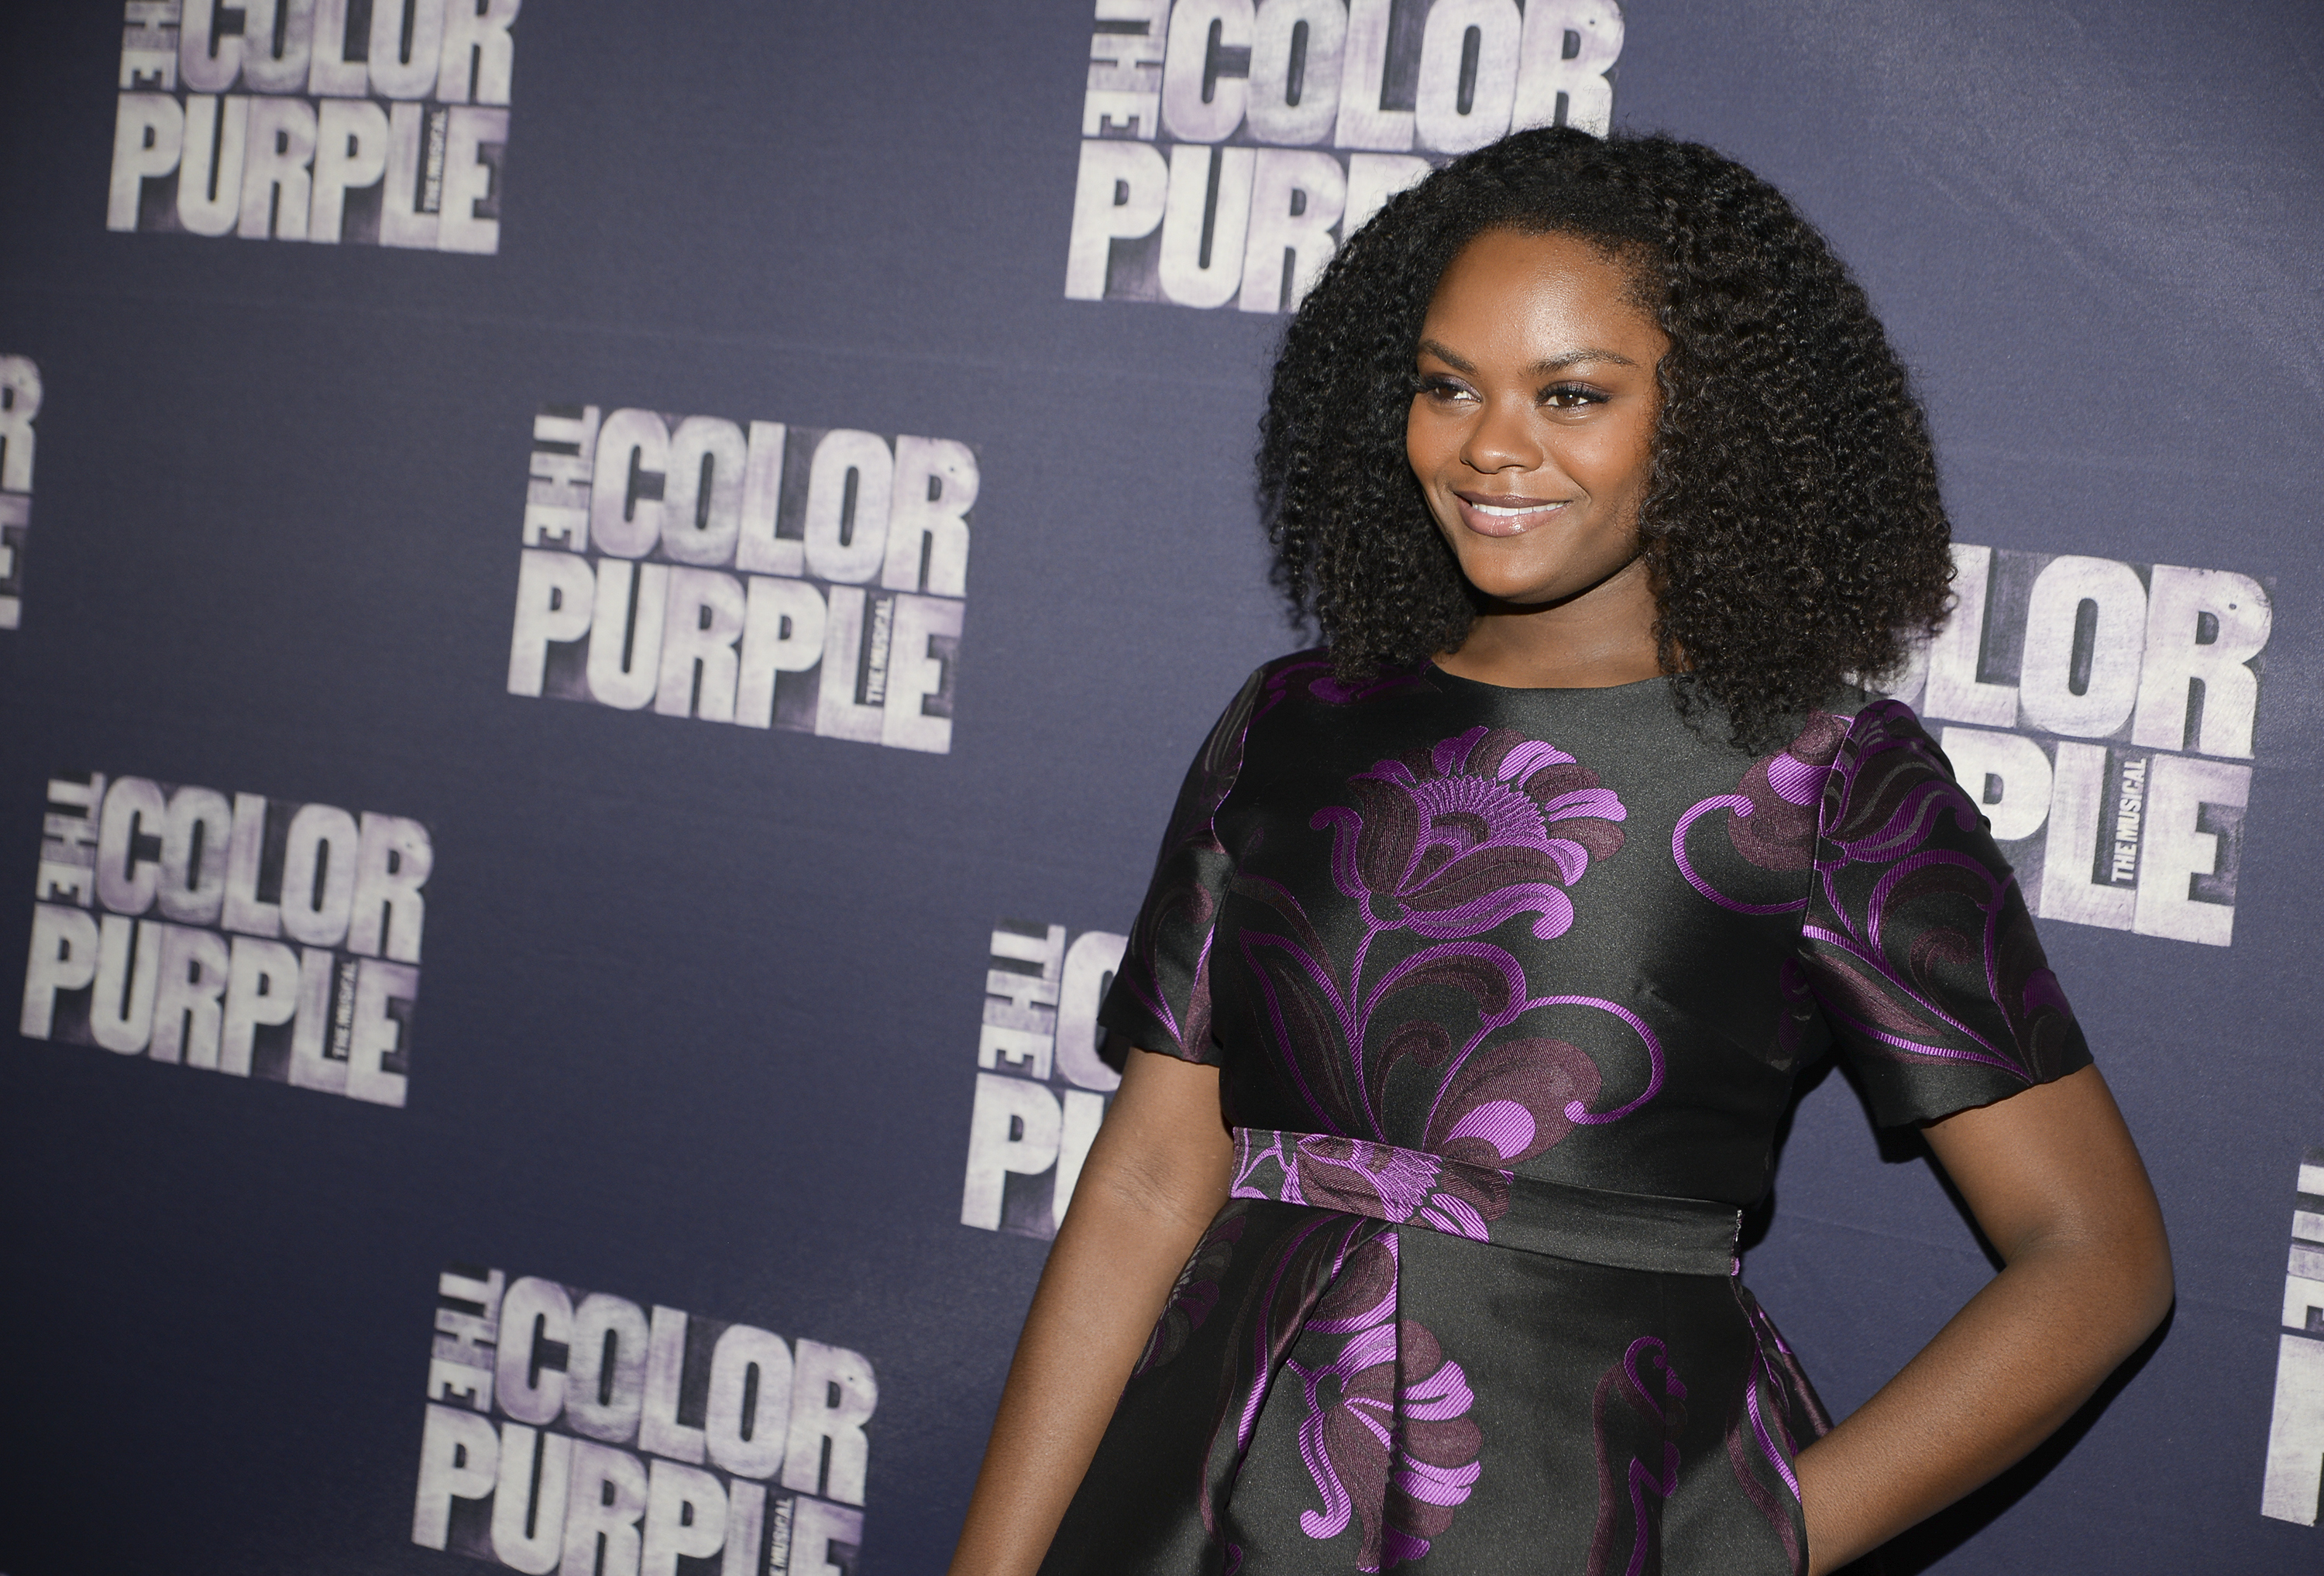 'The Color Purple' Broadway opening night - Arrivals And Curtain Call